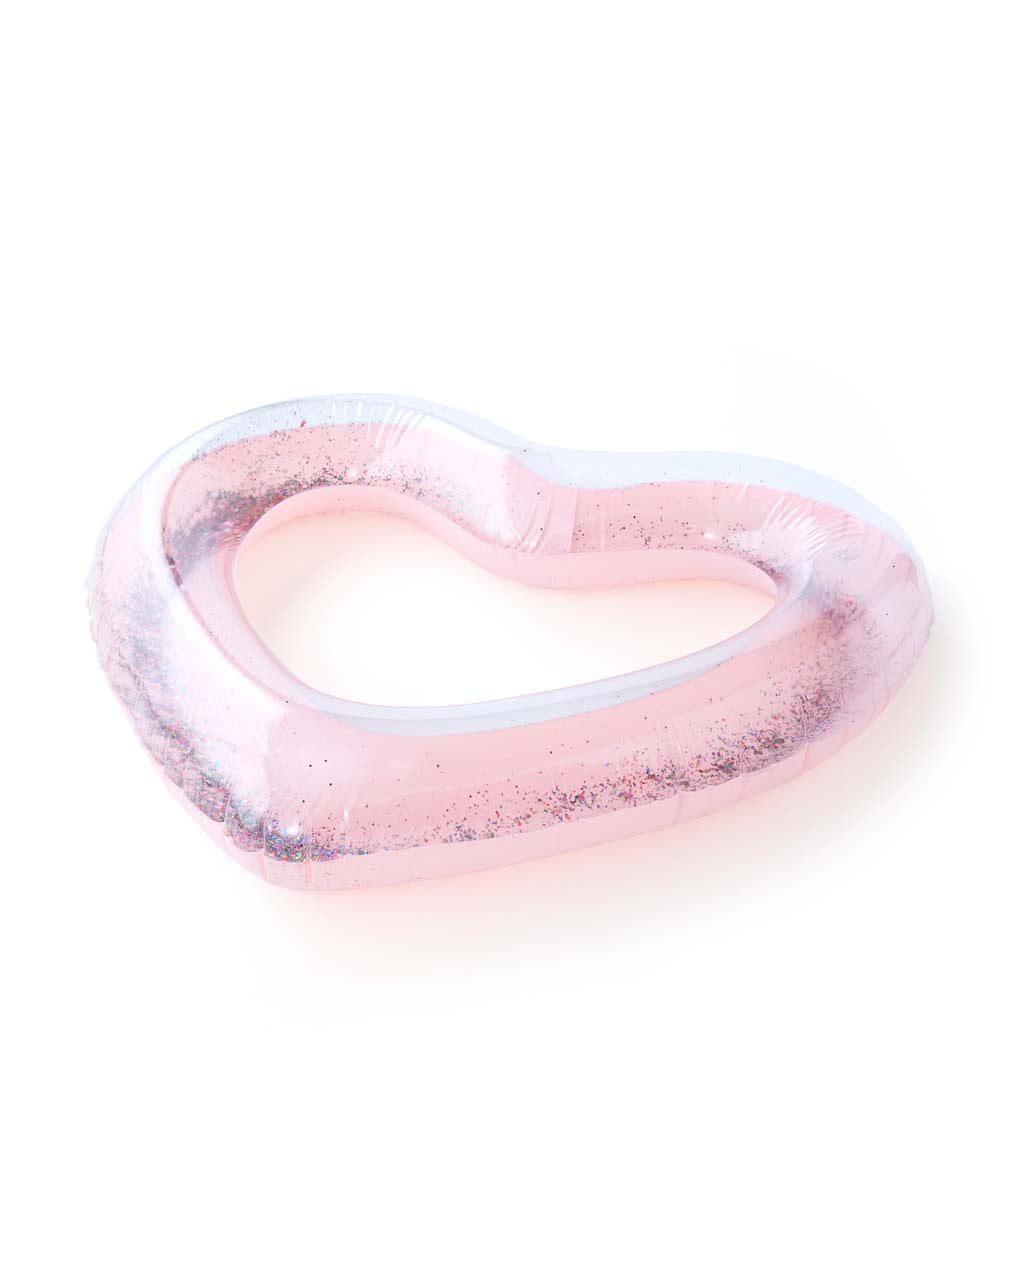 The translucent pink top reveals the glitter inside.